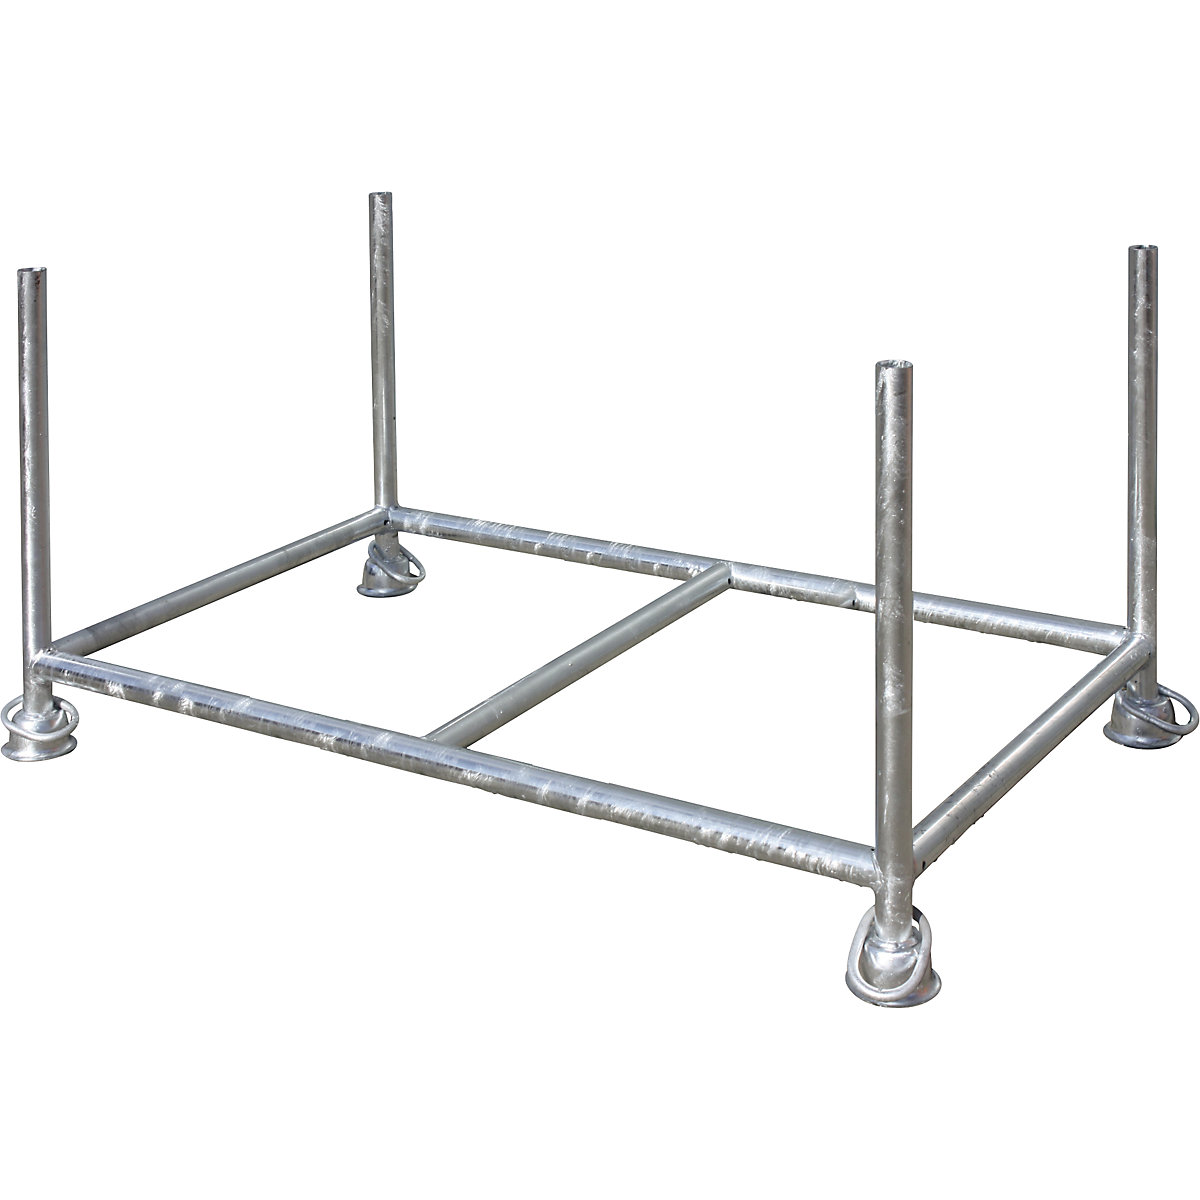 Stacking frame – Eichinger, LxWxH 1480 x 920 x 700 mm, with 2 cross tubes, zinc plated-2